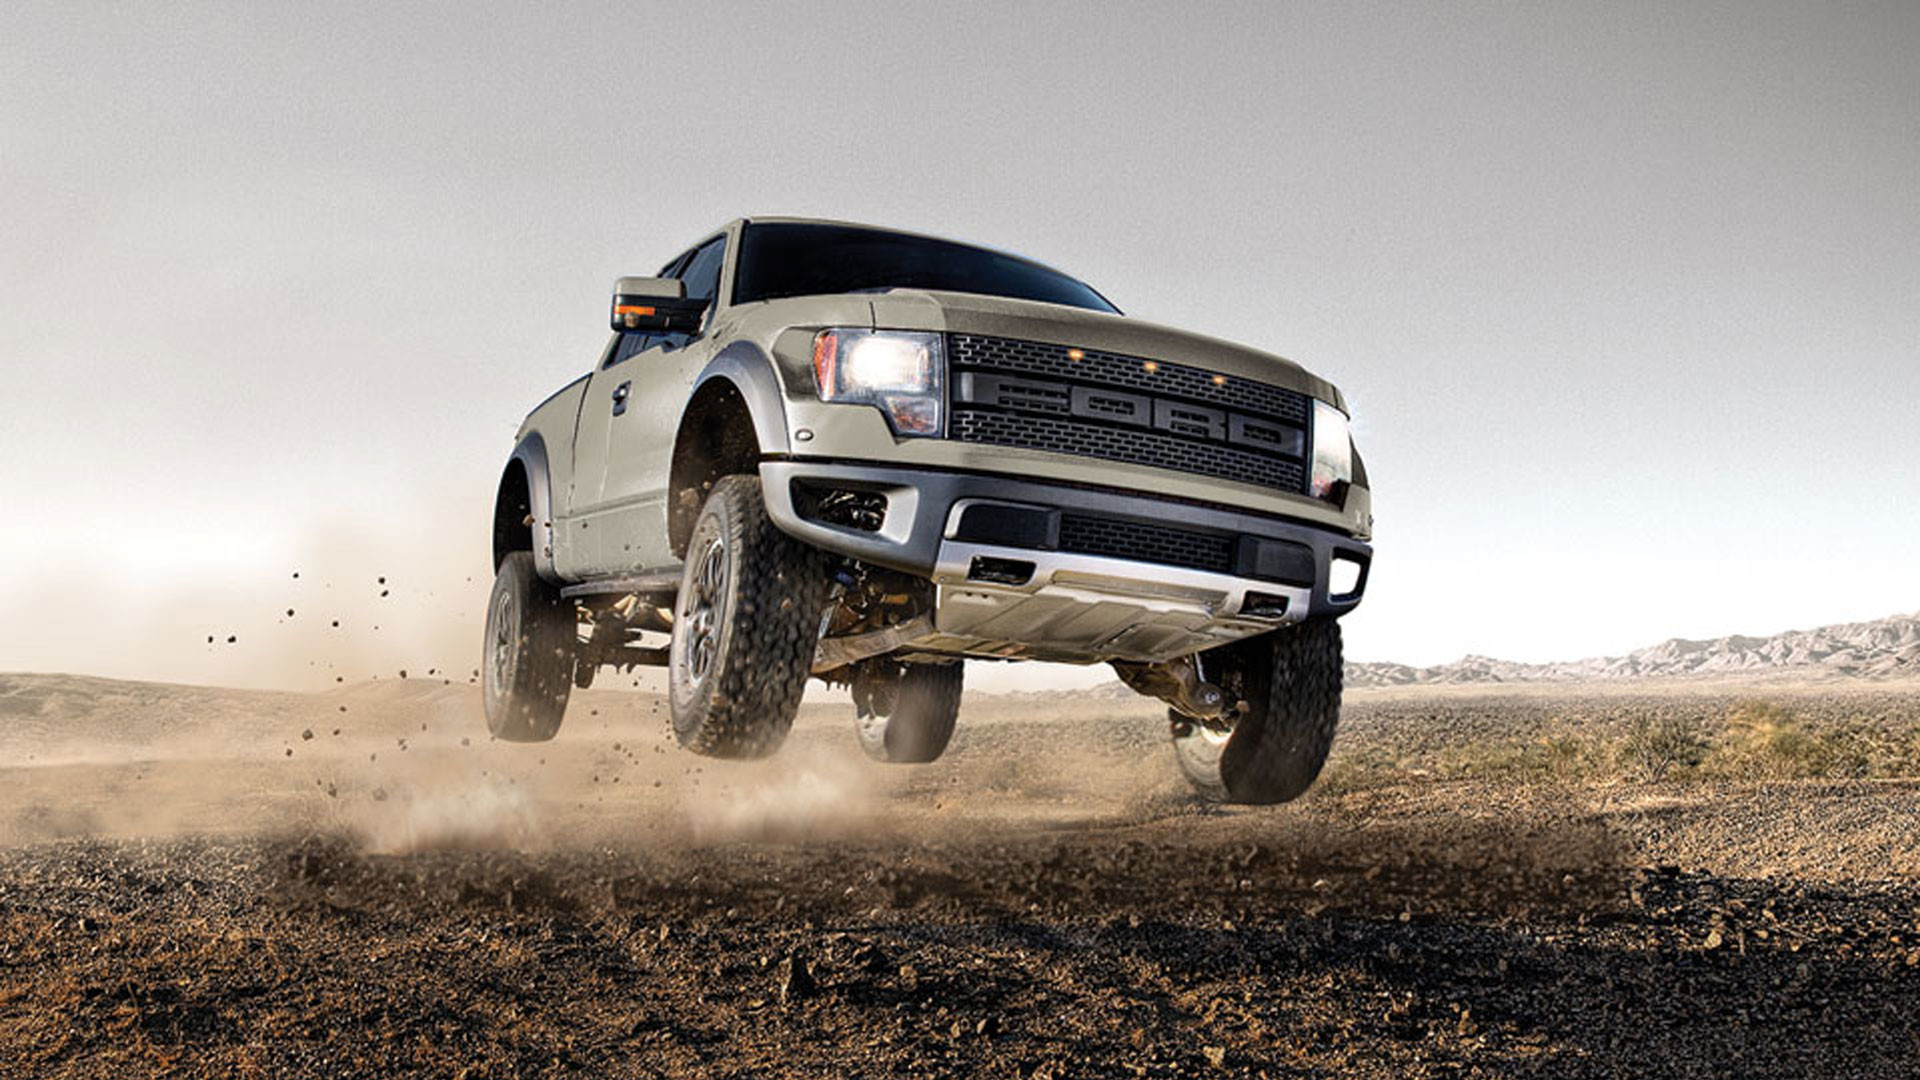 1920x1080 This would be a change of pace - 2012 Ford SVT Raptor